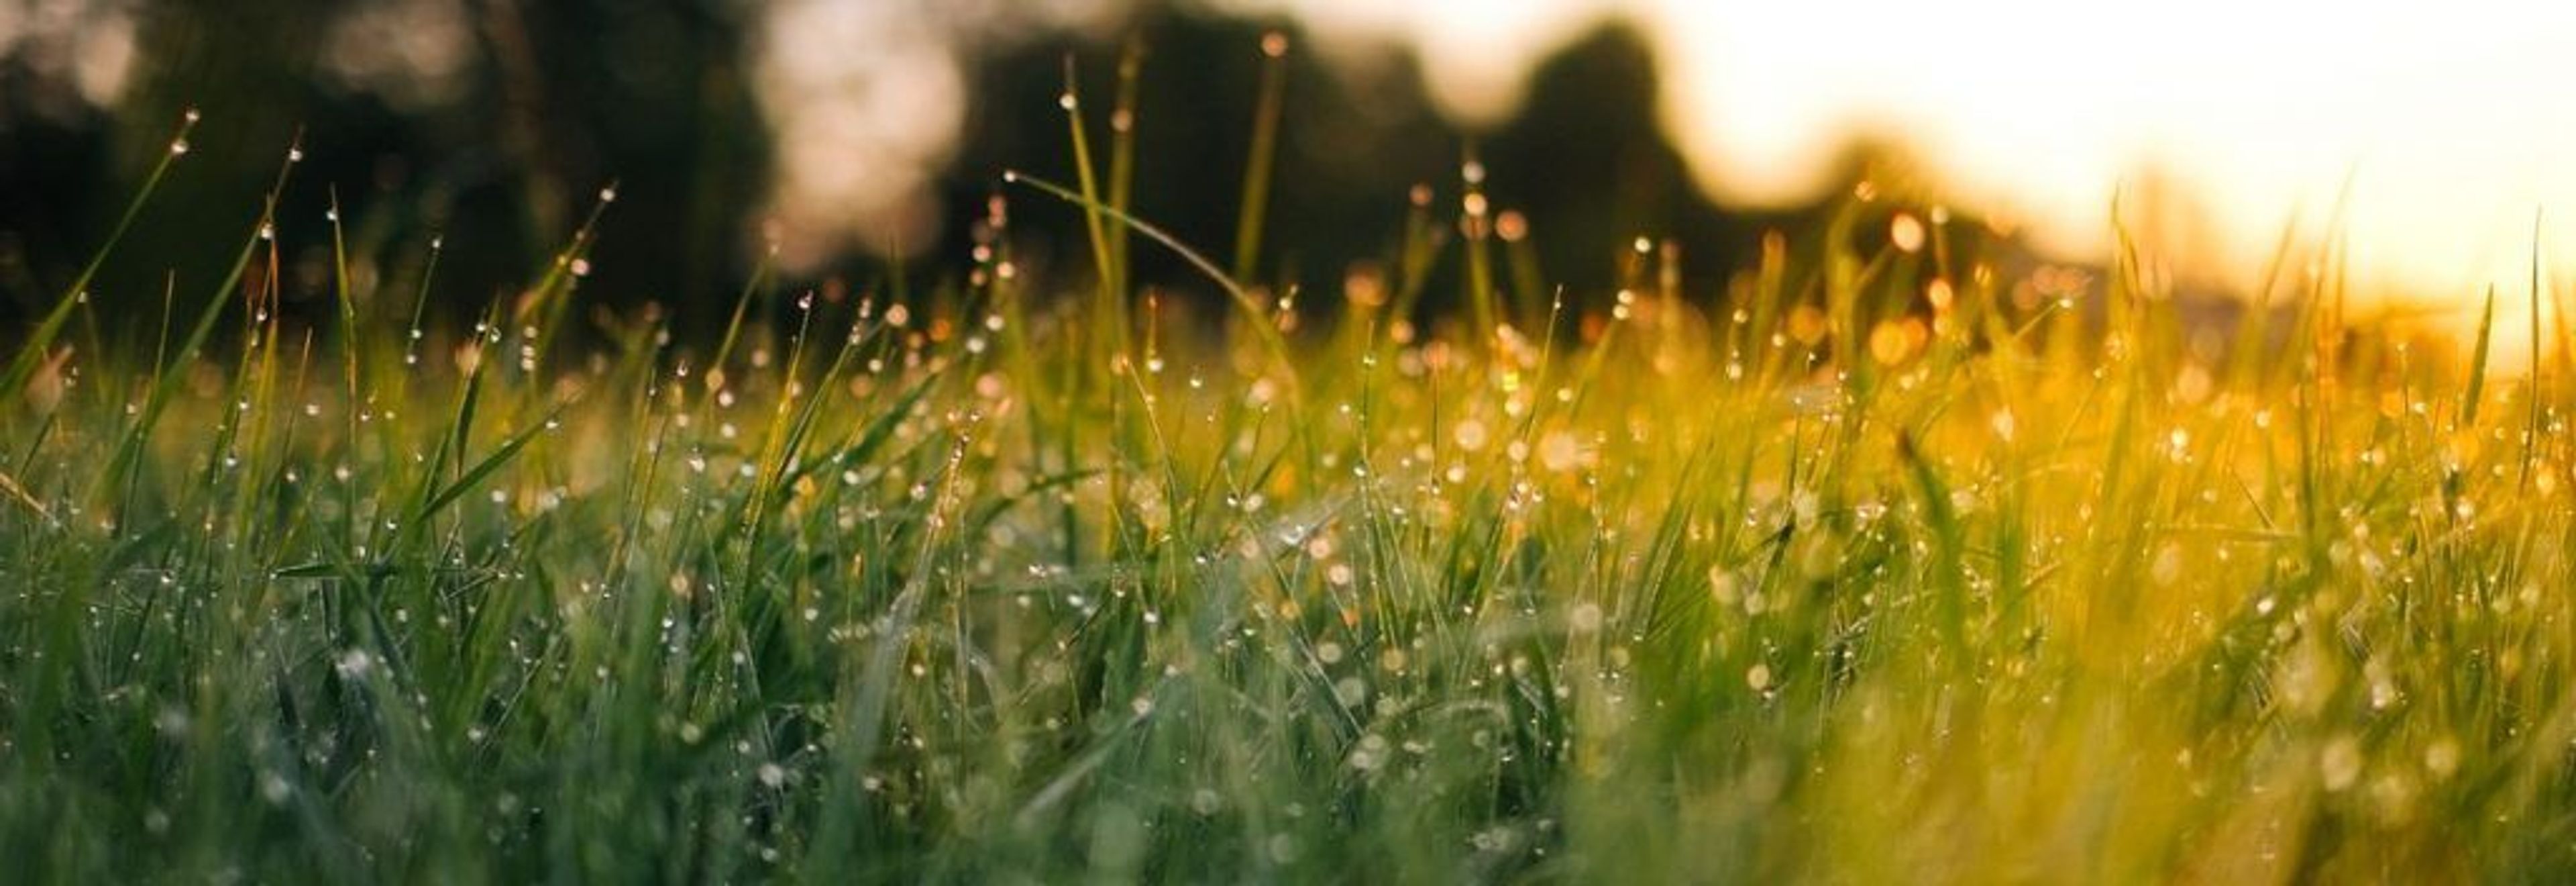 Blades of grass with rain droplets on them 